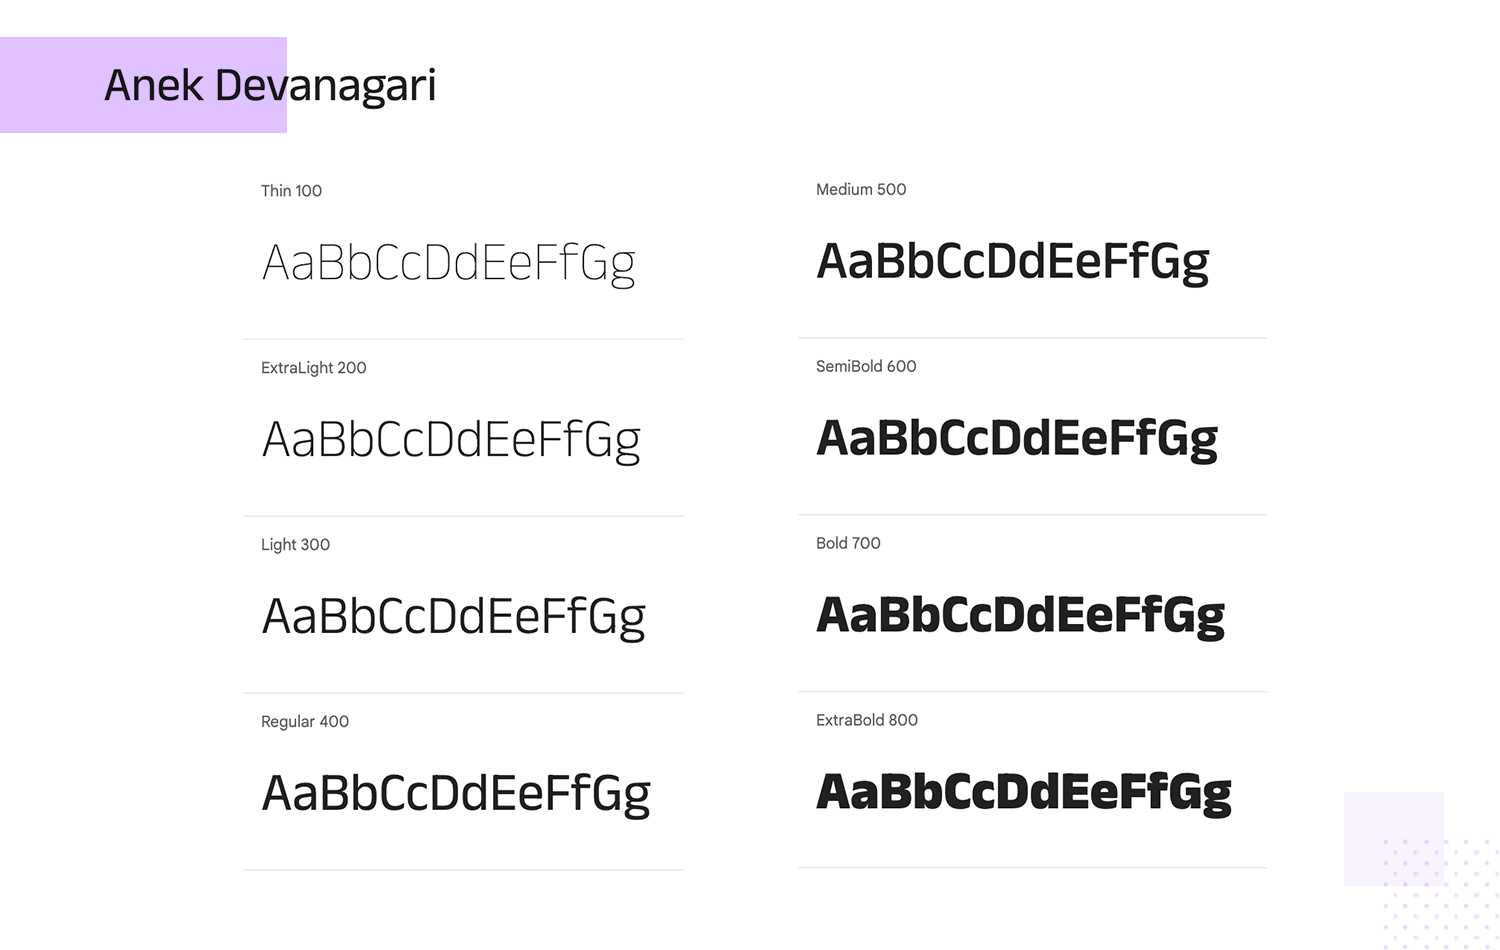 Anek Devanagari font showcase with weights from Thin 100 to ExtraBold 800.